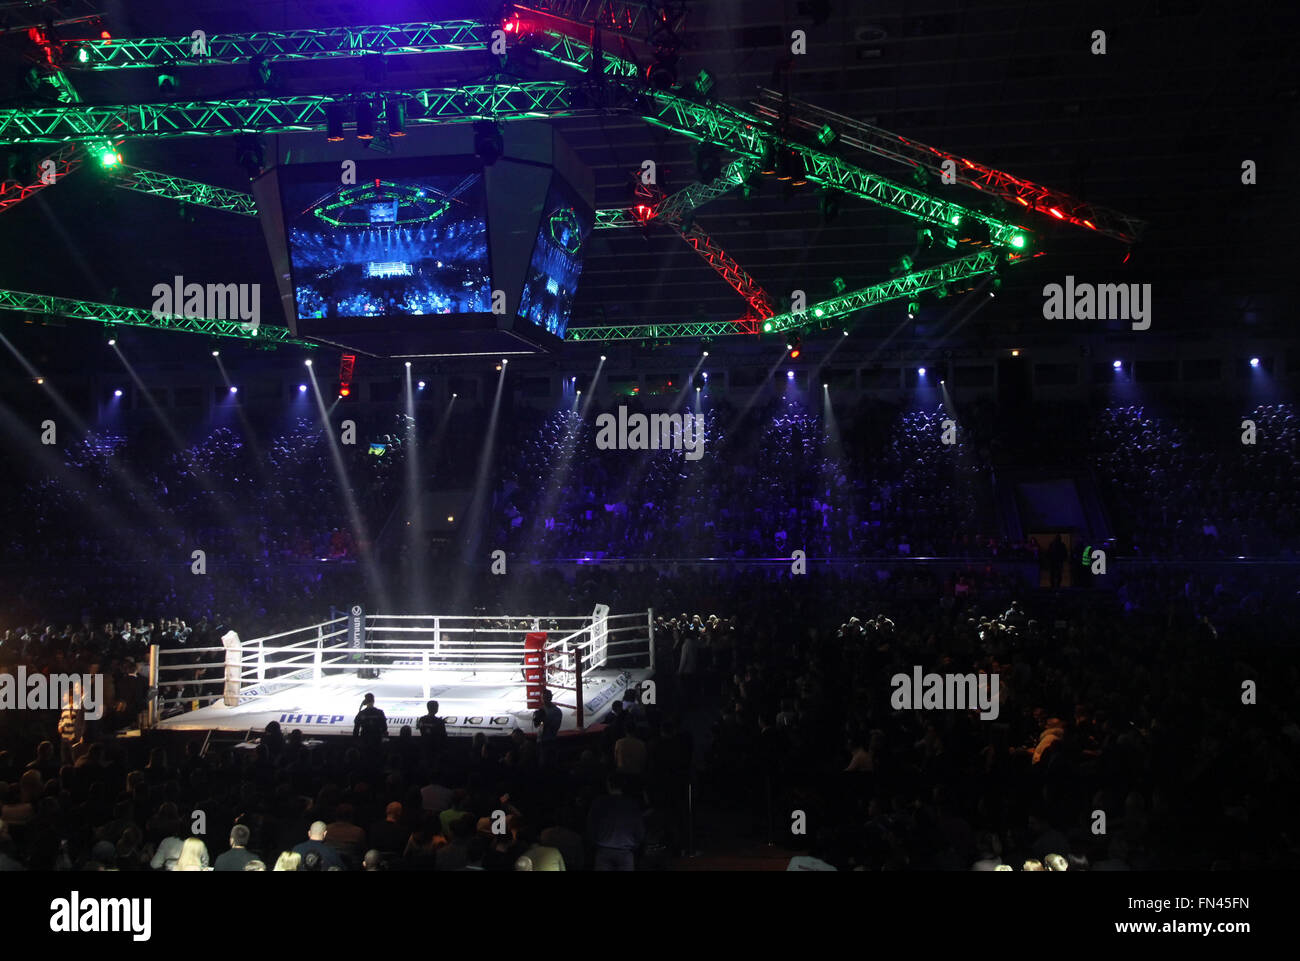 KYIV, UKRAINE - DECEMBER 13, 2014: Boxing ring and tribunes of Palace of Sports in Kyiv during 'Evening of Boxing' Stock Photo